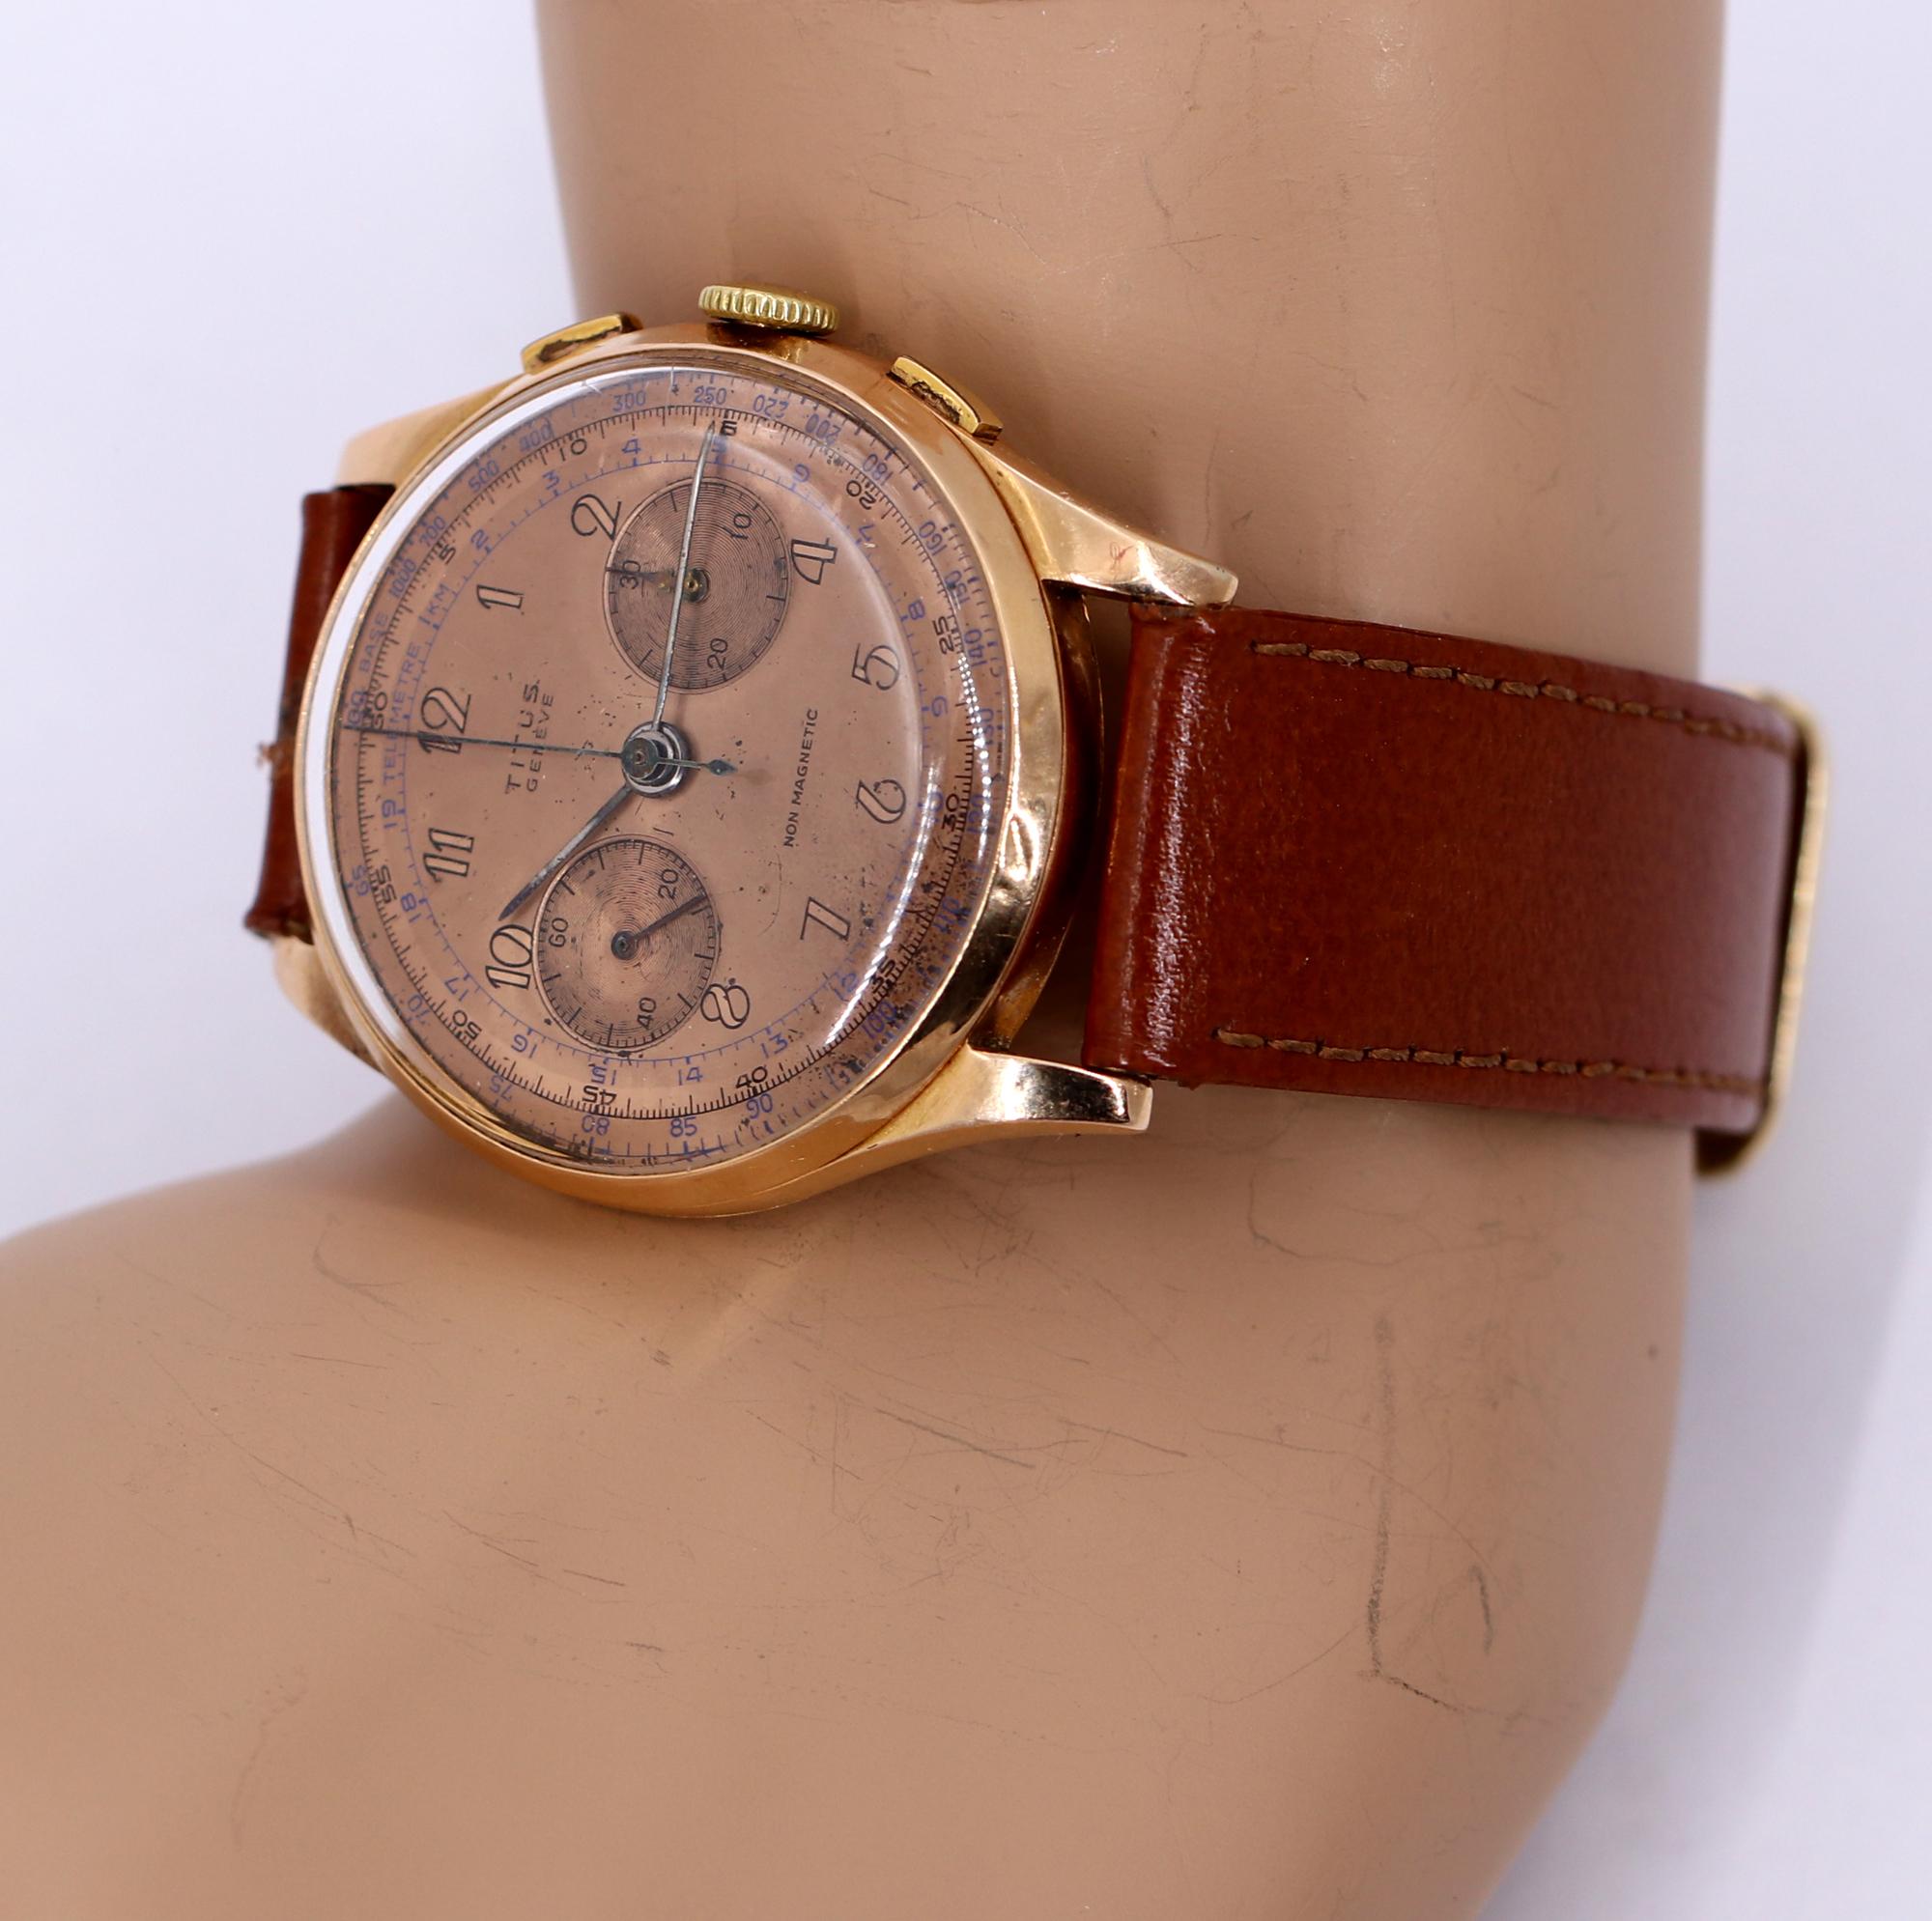 A vintage 18K rose gold chronograph wristwatch by Titus. Featuring a rose gold dial with art deco style numerals, this mid-century timepiece is sophisticated as well as sporty. The subsidiary dials are detailed with an engine turned look. Hosting a